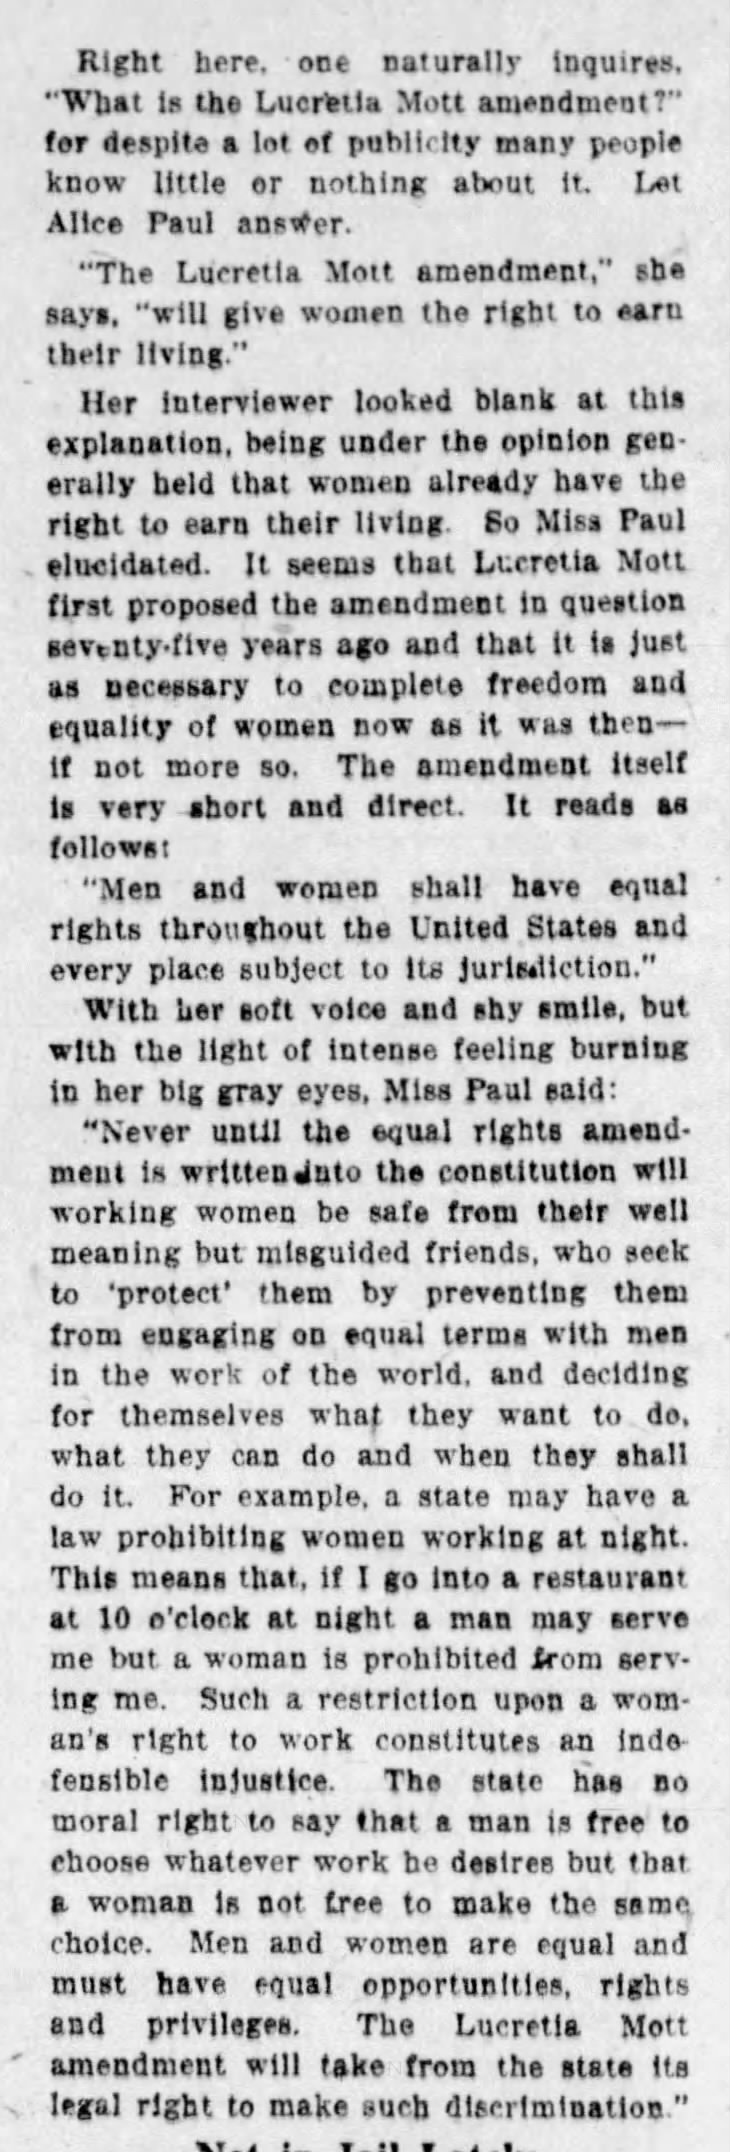 Quotes from Alice Paul in 1926 about the Equal Rights Amendment